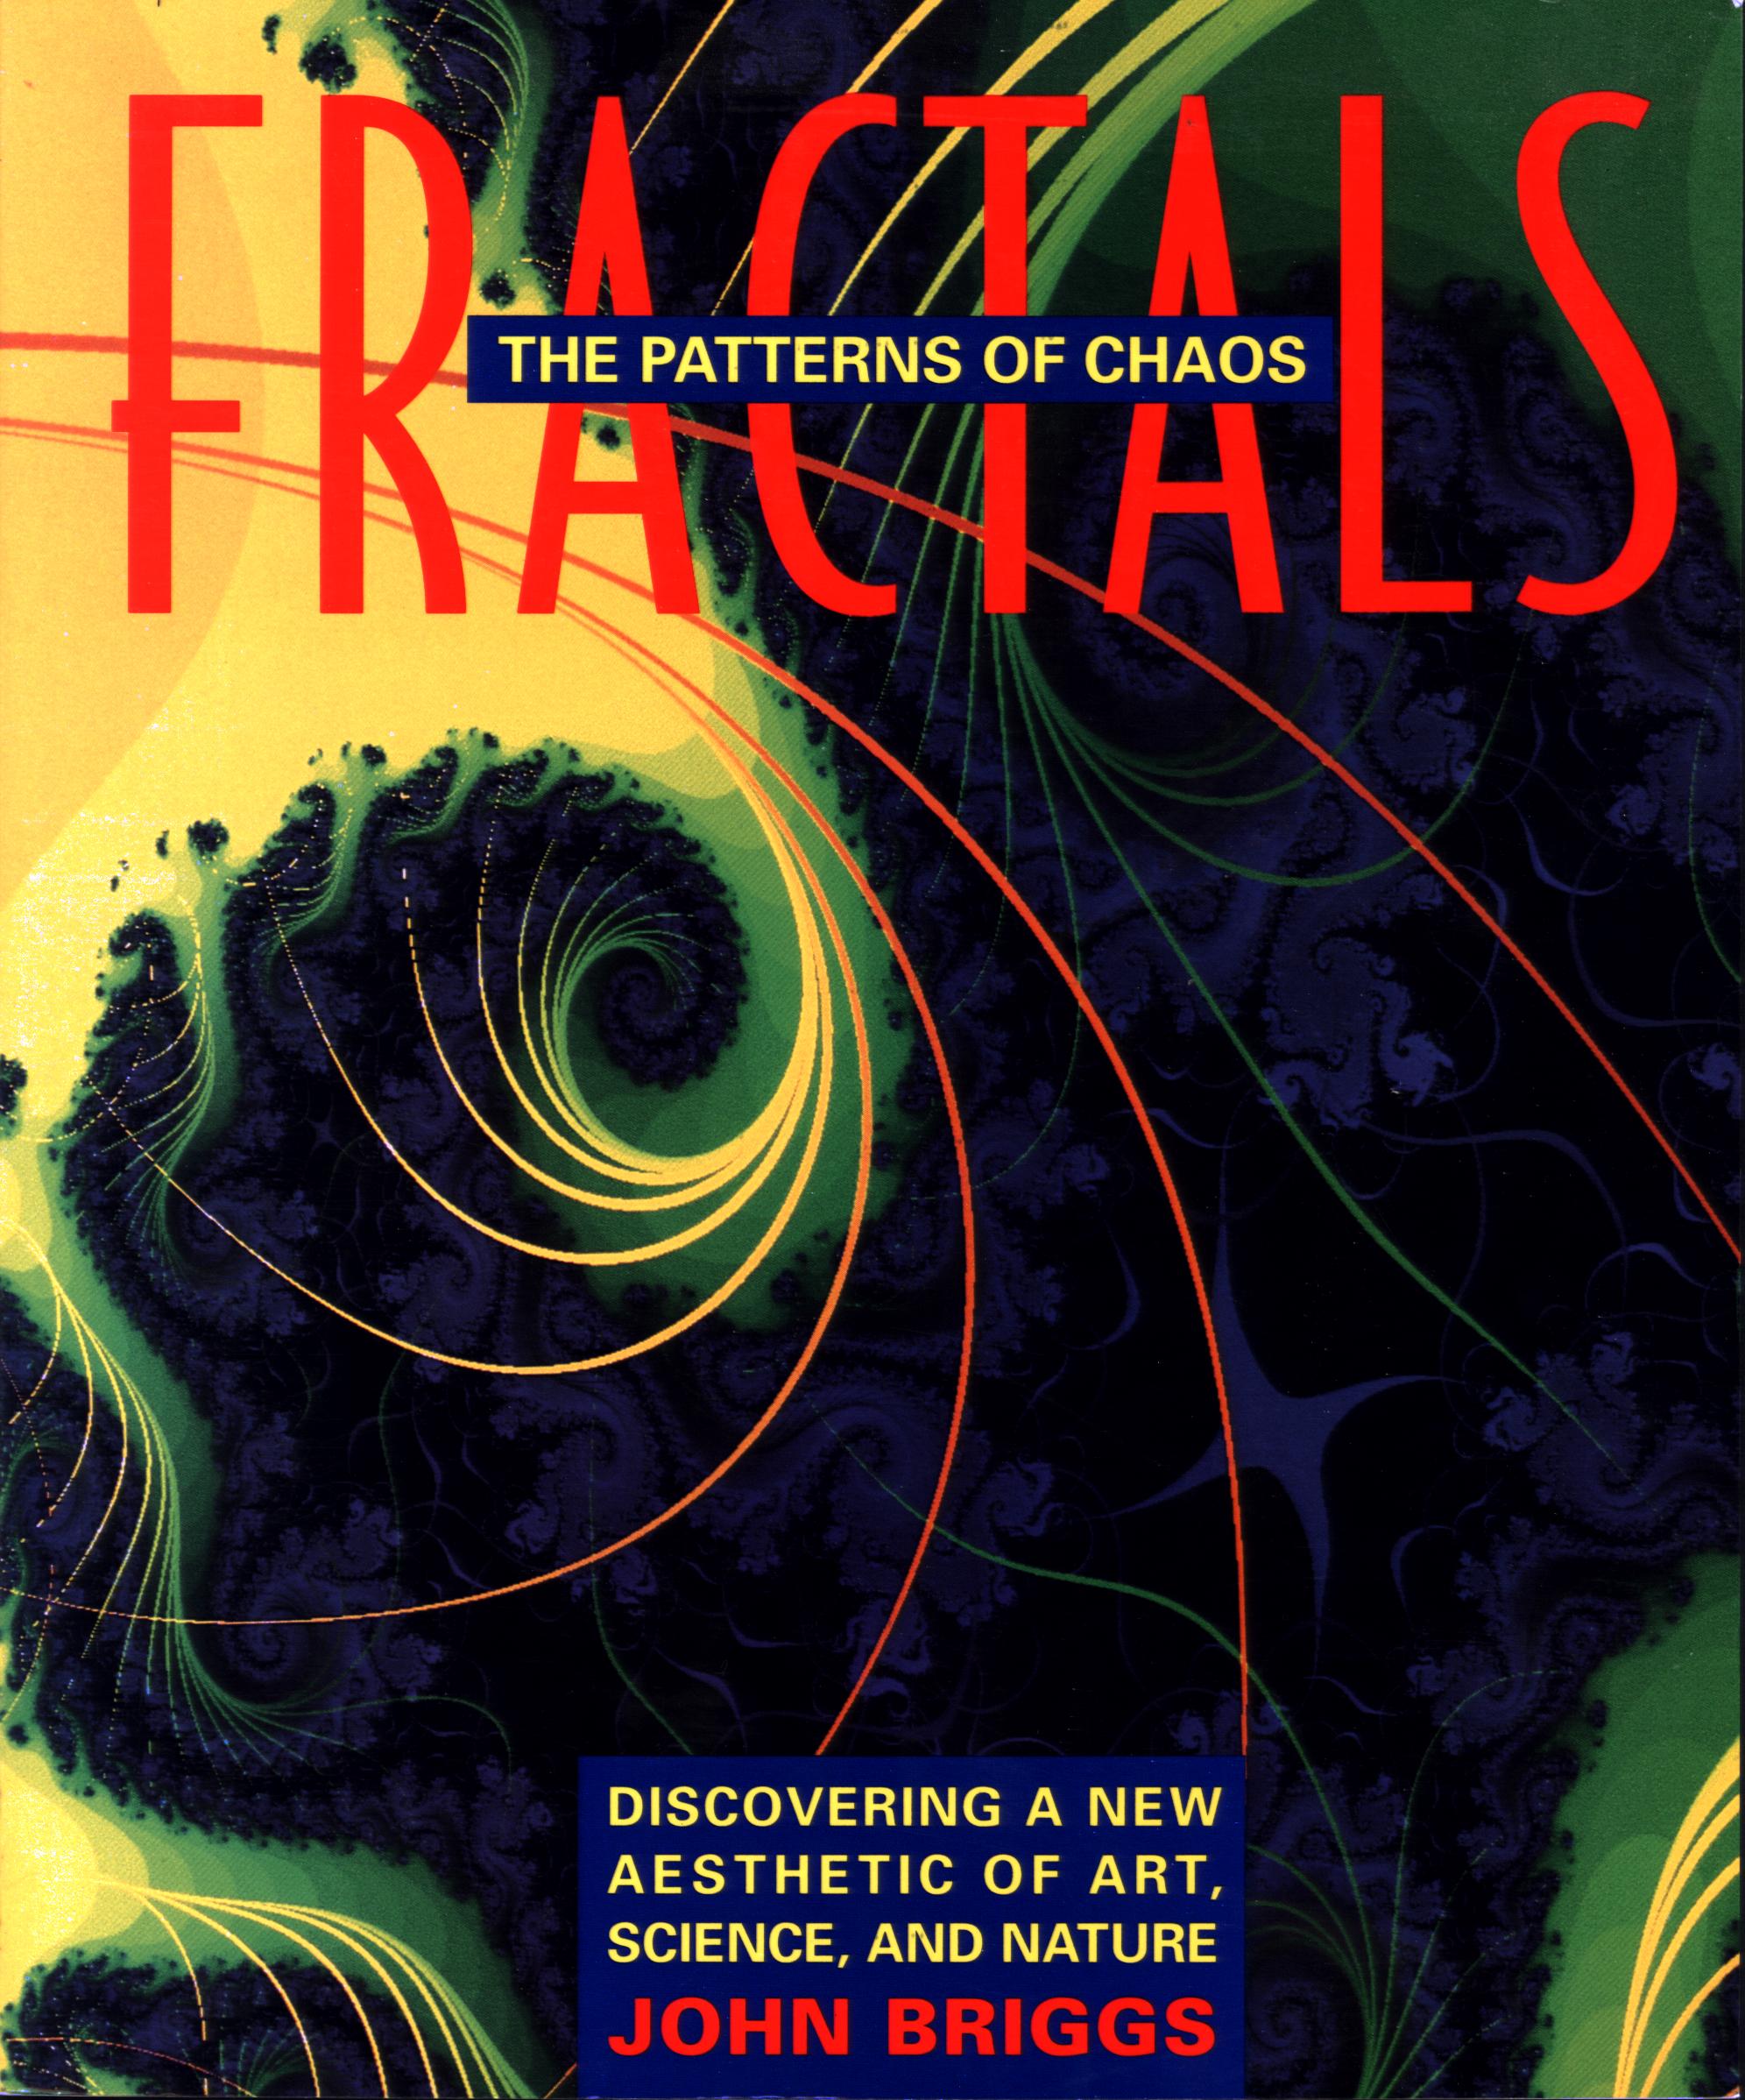 FRACTALS: THE PATTERNS OF CHAOS--discovering a new aesthetic of art, science, and nature. sisc4058afrontcover